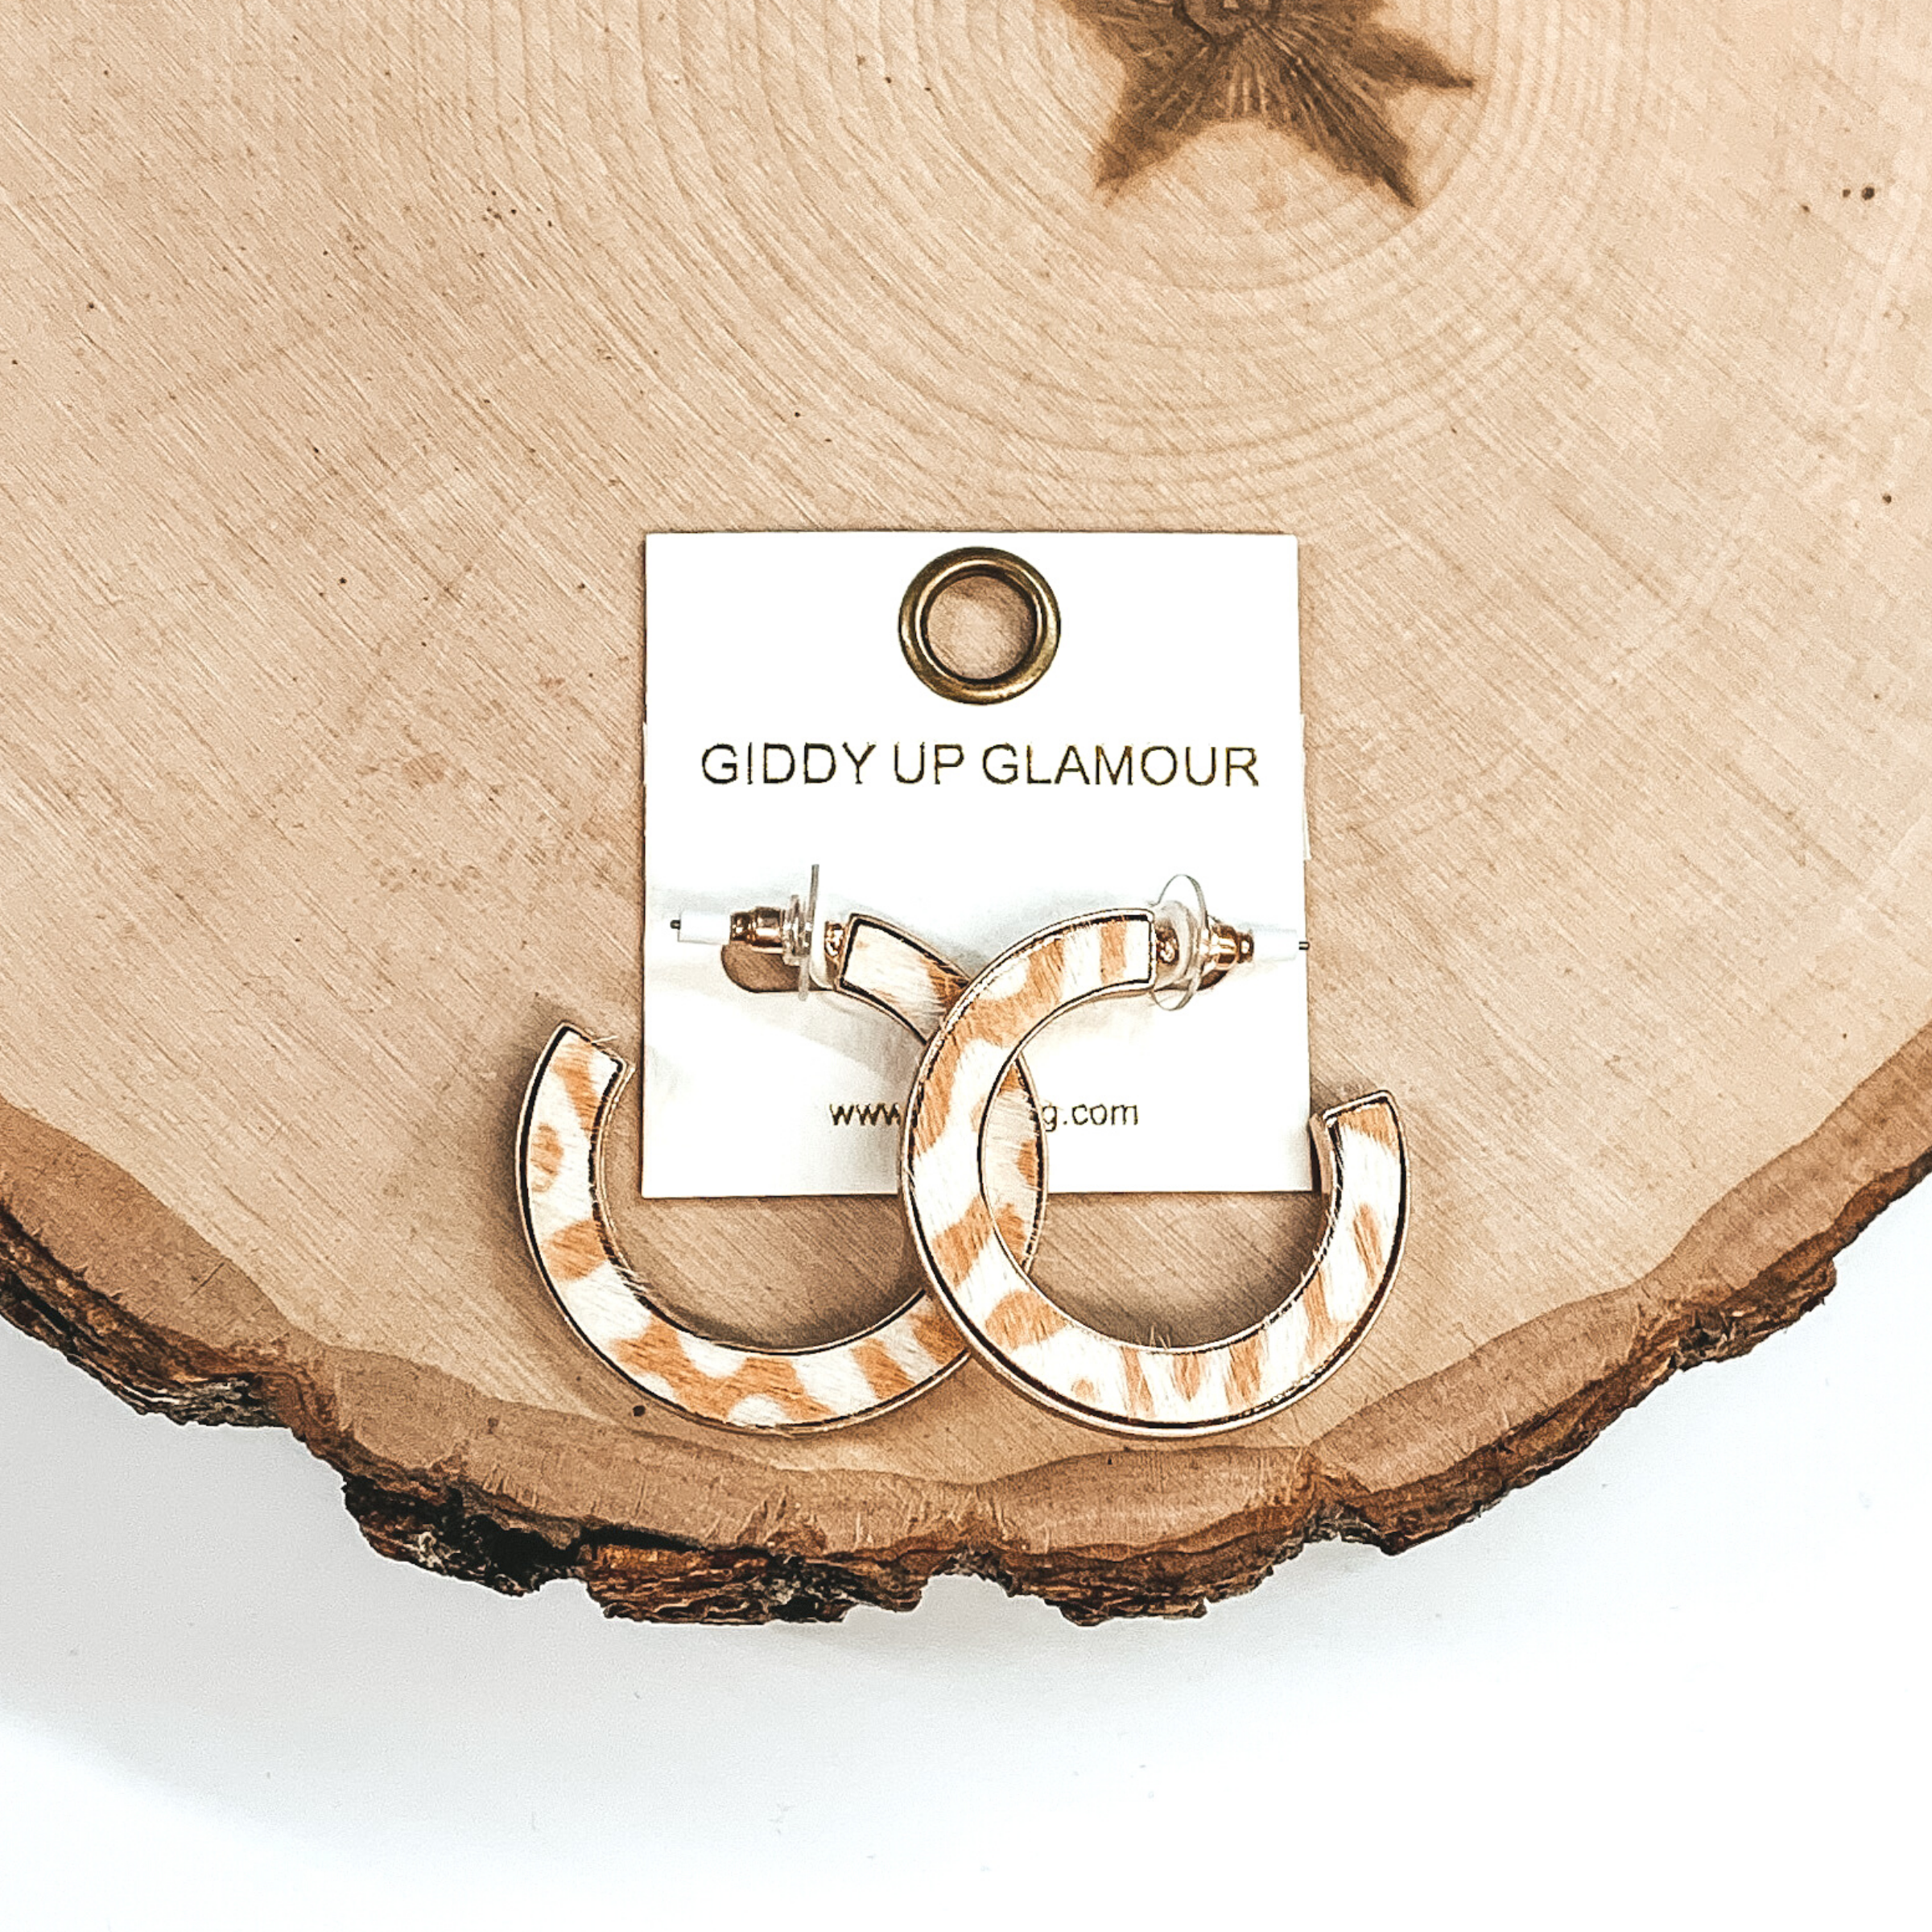 Gold hoops with white and tan animal print inlay. These earrings are pictured laying on a piece of wood on a white background.